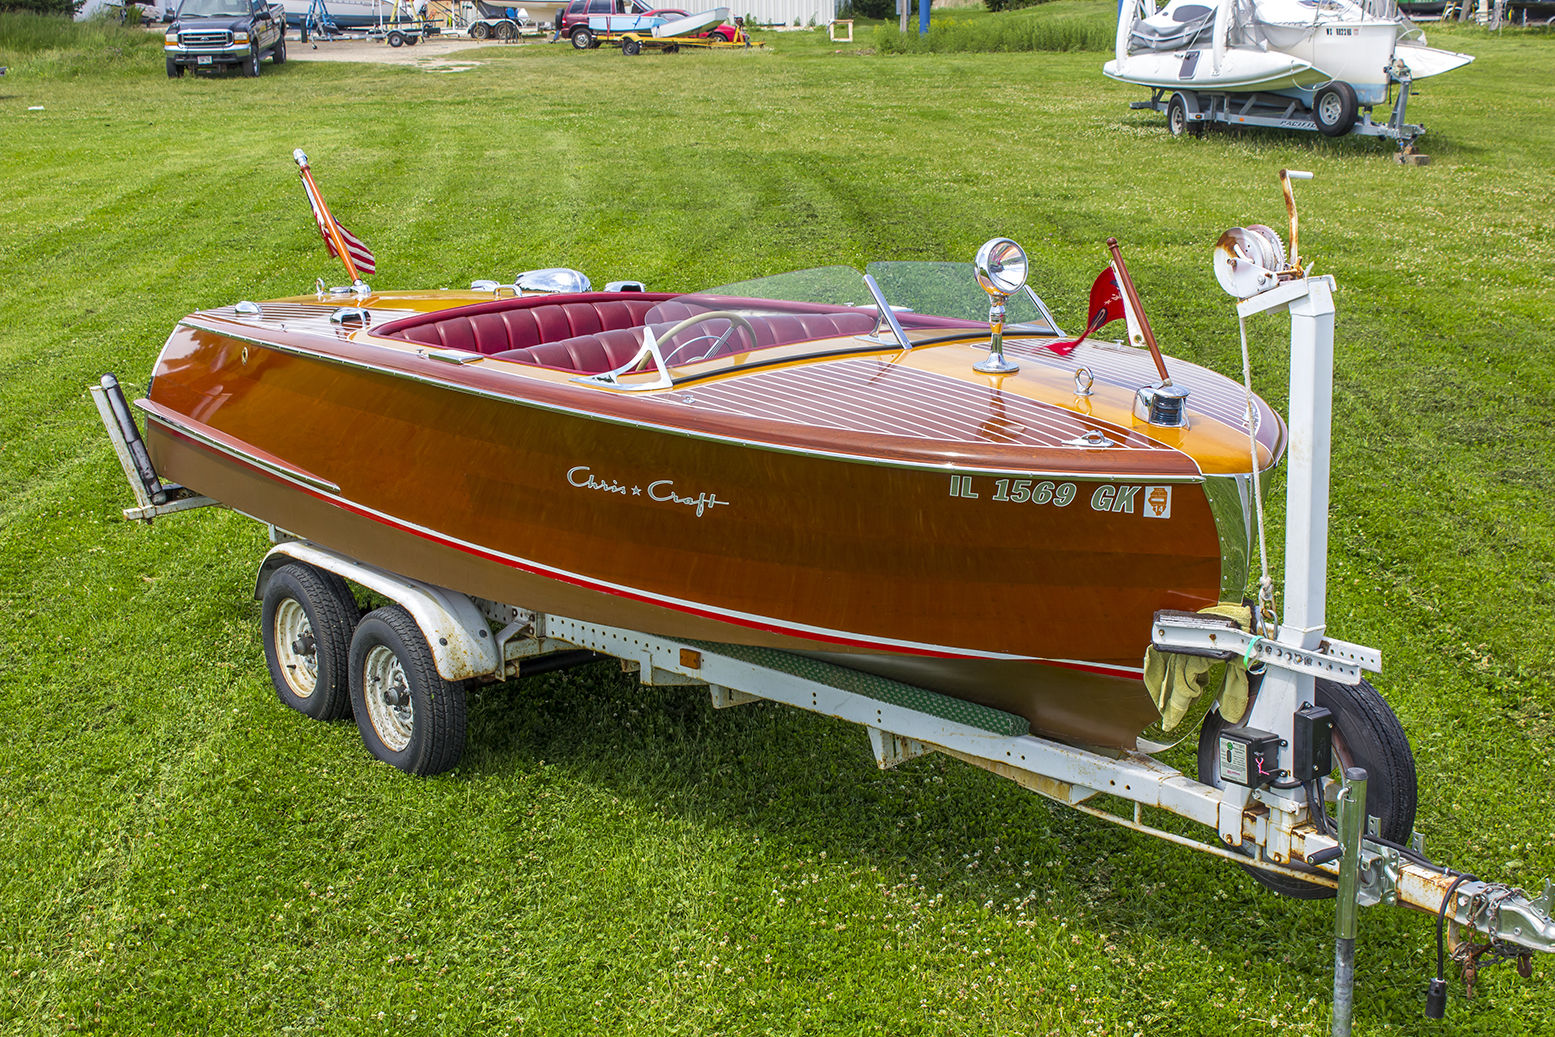 Chris Craft Riviera 1950 for sale for $25,900 - Boats-from ...